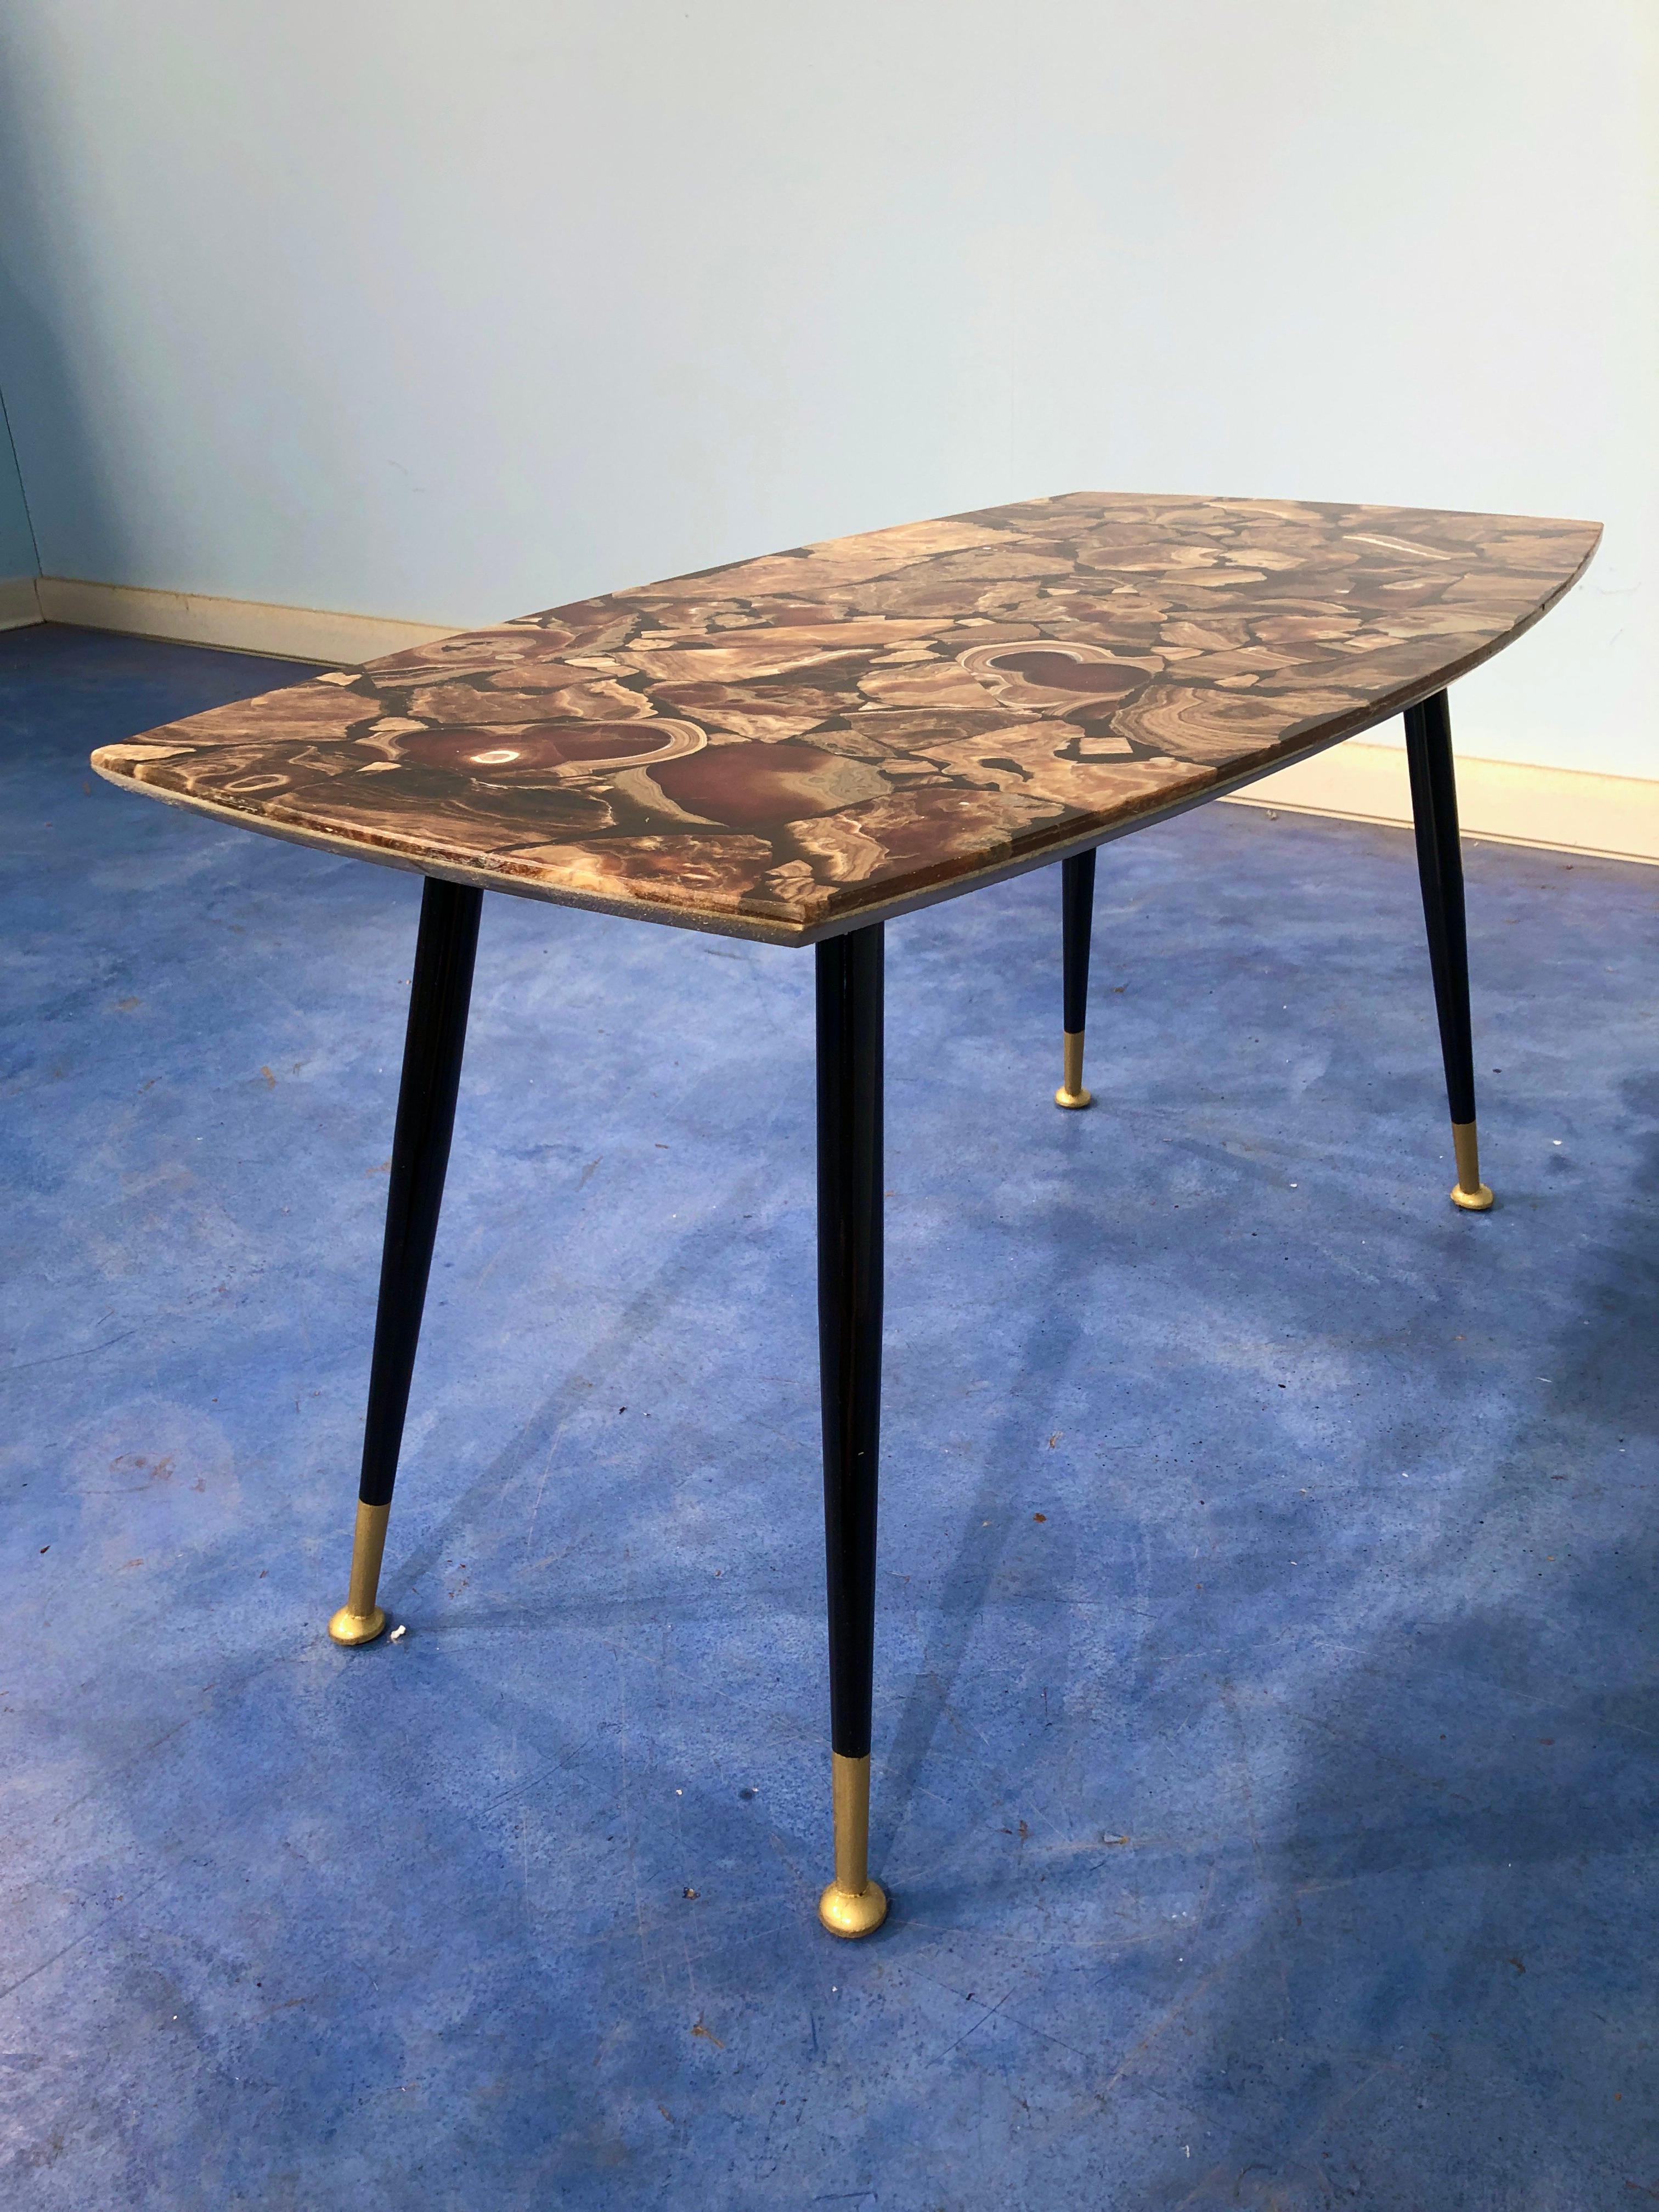 Italian Midcentury Mosaic Marble Coffee Table, 1950 For Sale 9